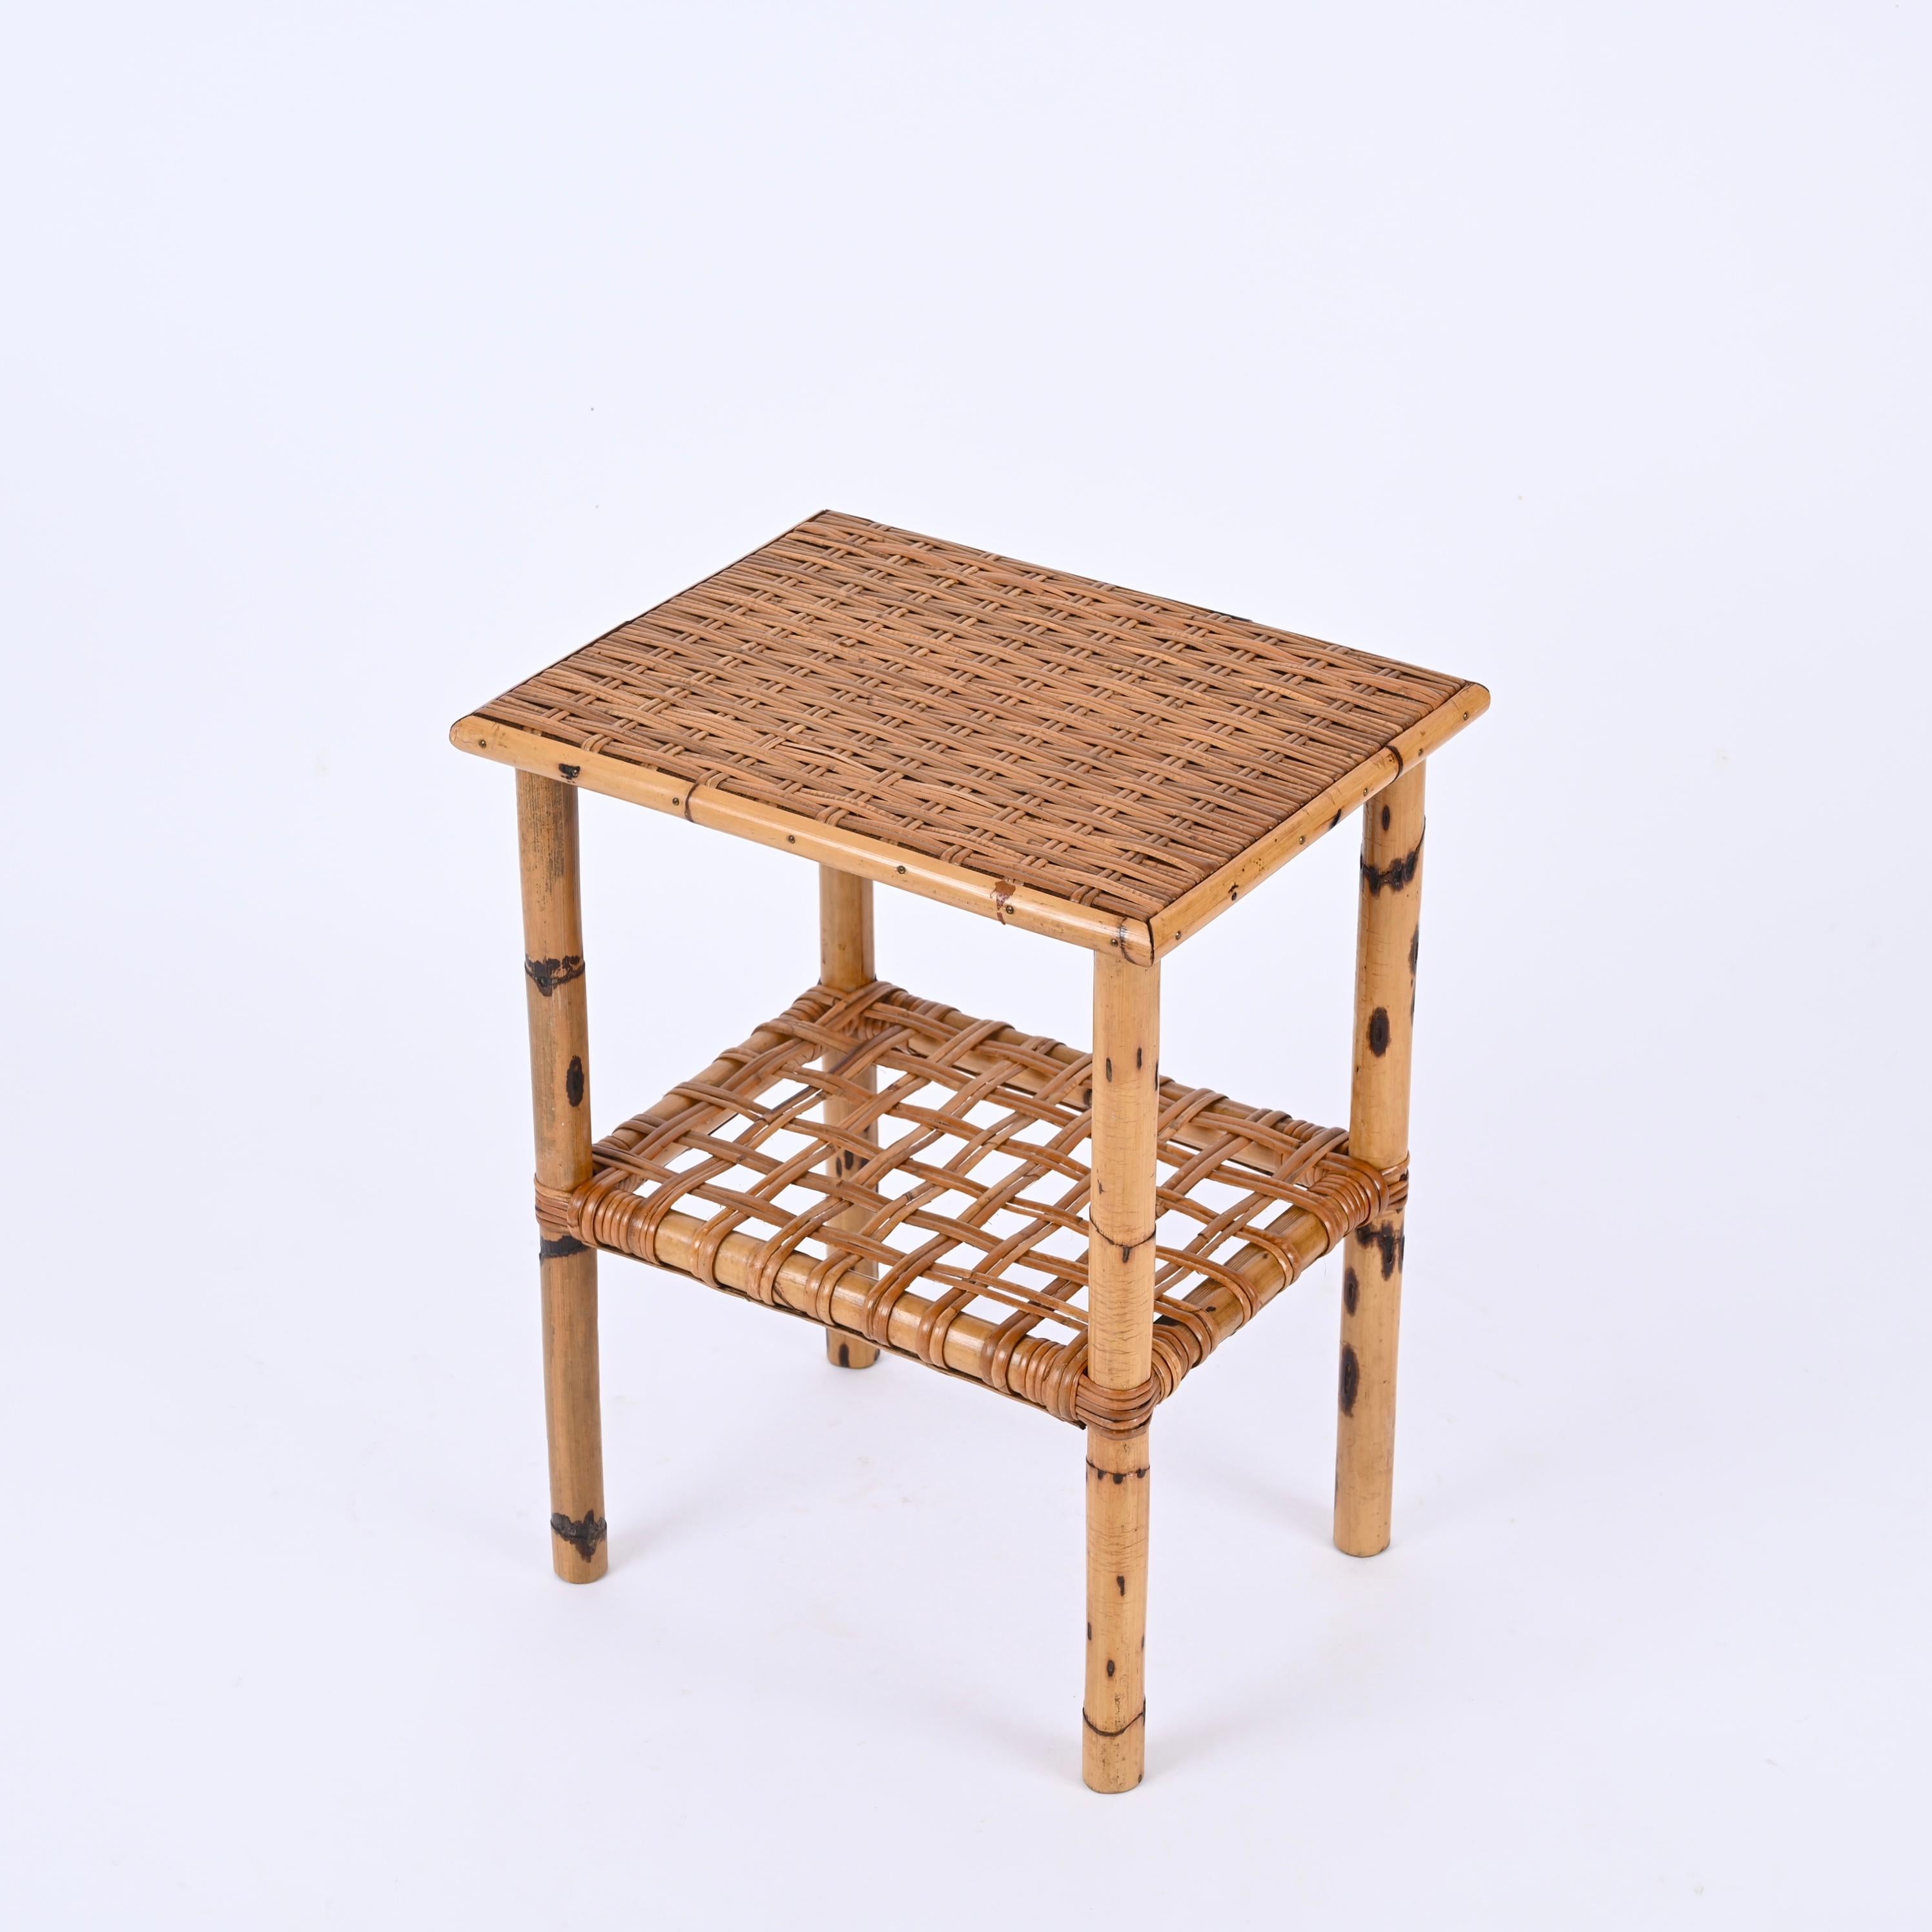 Midcentury Bamboo and Rattan Italian Coffee Table with Magazine Rack, 1960s For Sale 3